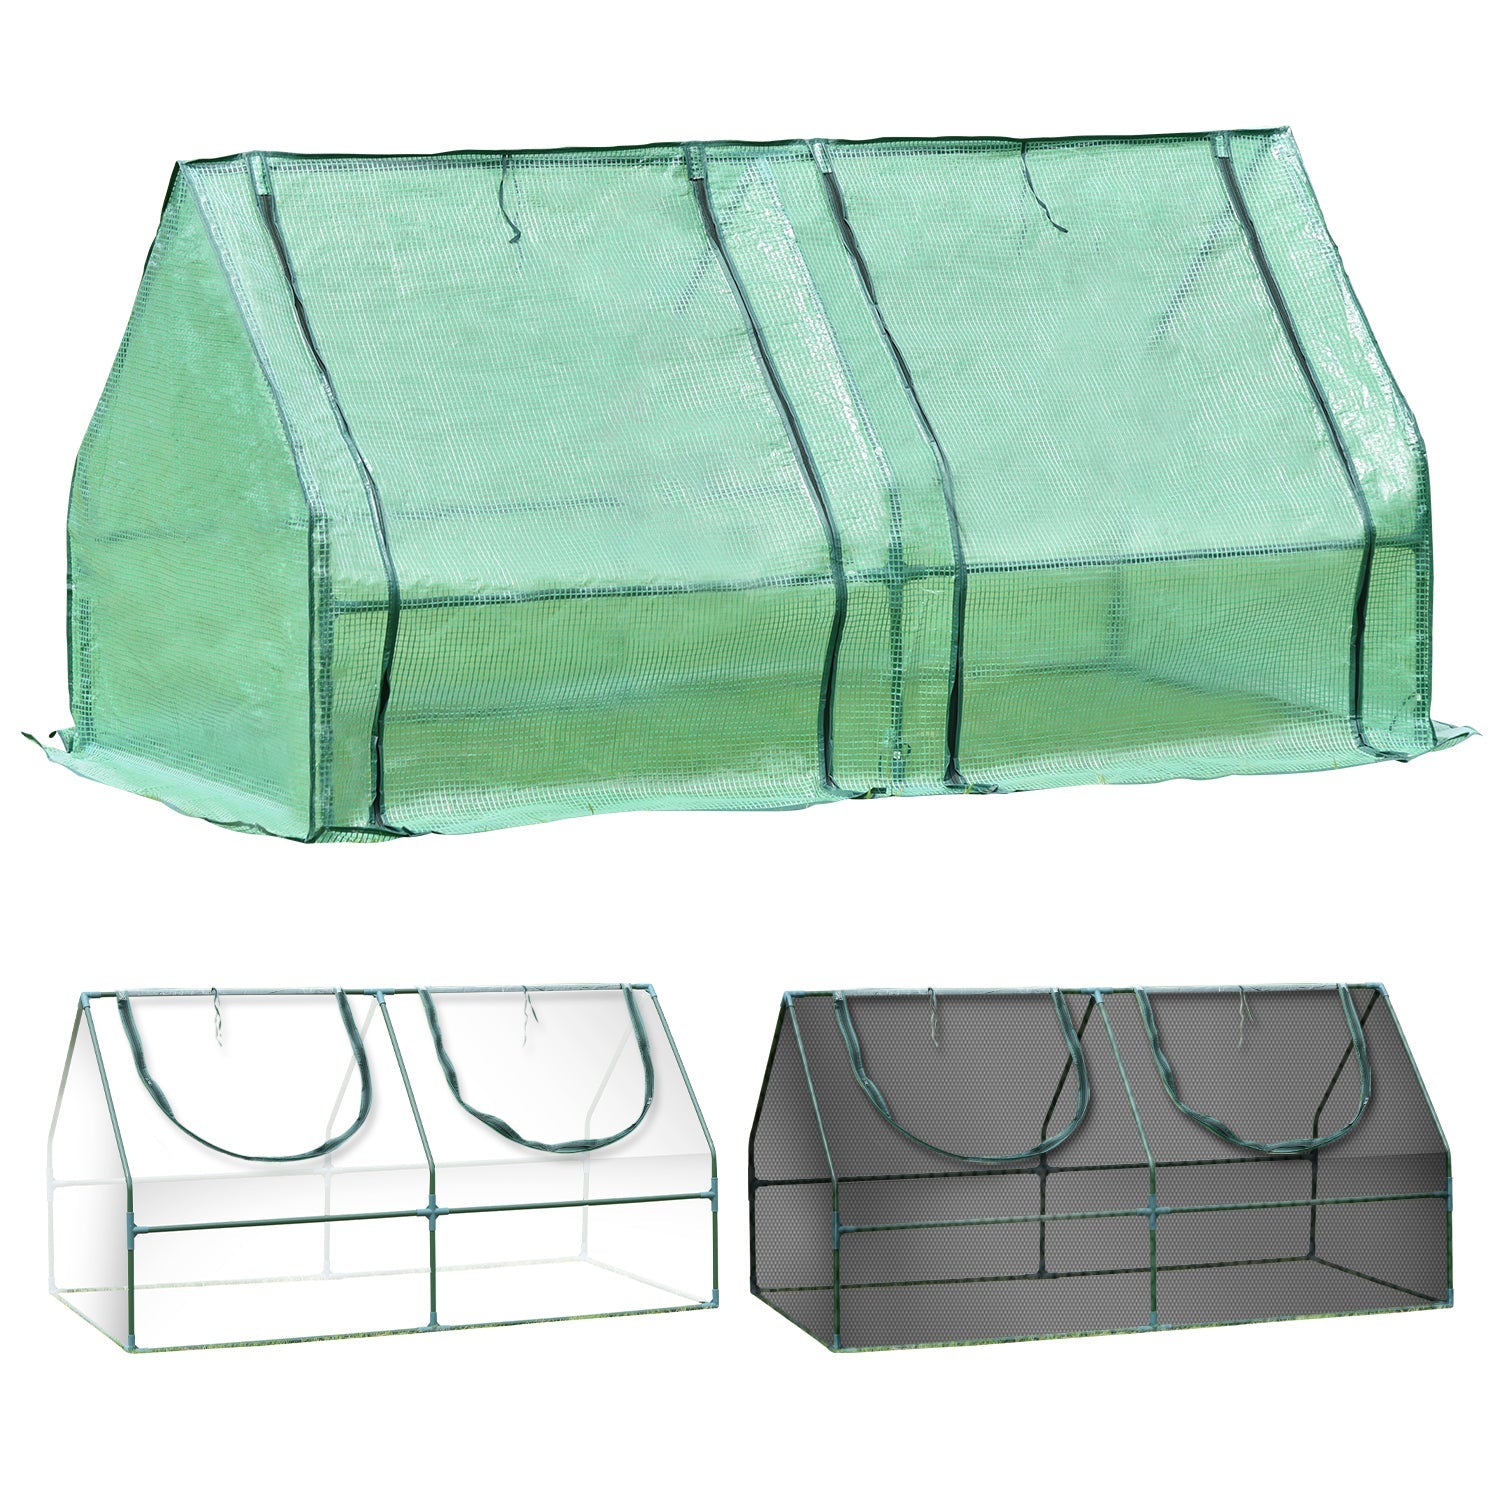 6 ft. x 3 ft. x 3ft. Mini Greenhouse with 2 Zipper Doors, Water Resistant UV Protected with 2 Covers Greenhouse Aoodor Green / Transparent / Mesh Netting  